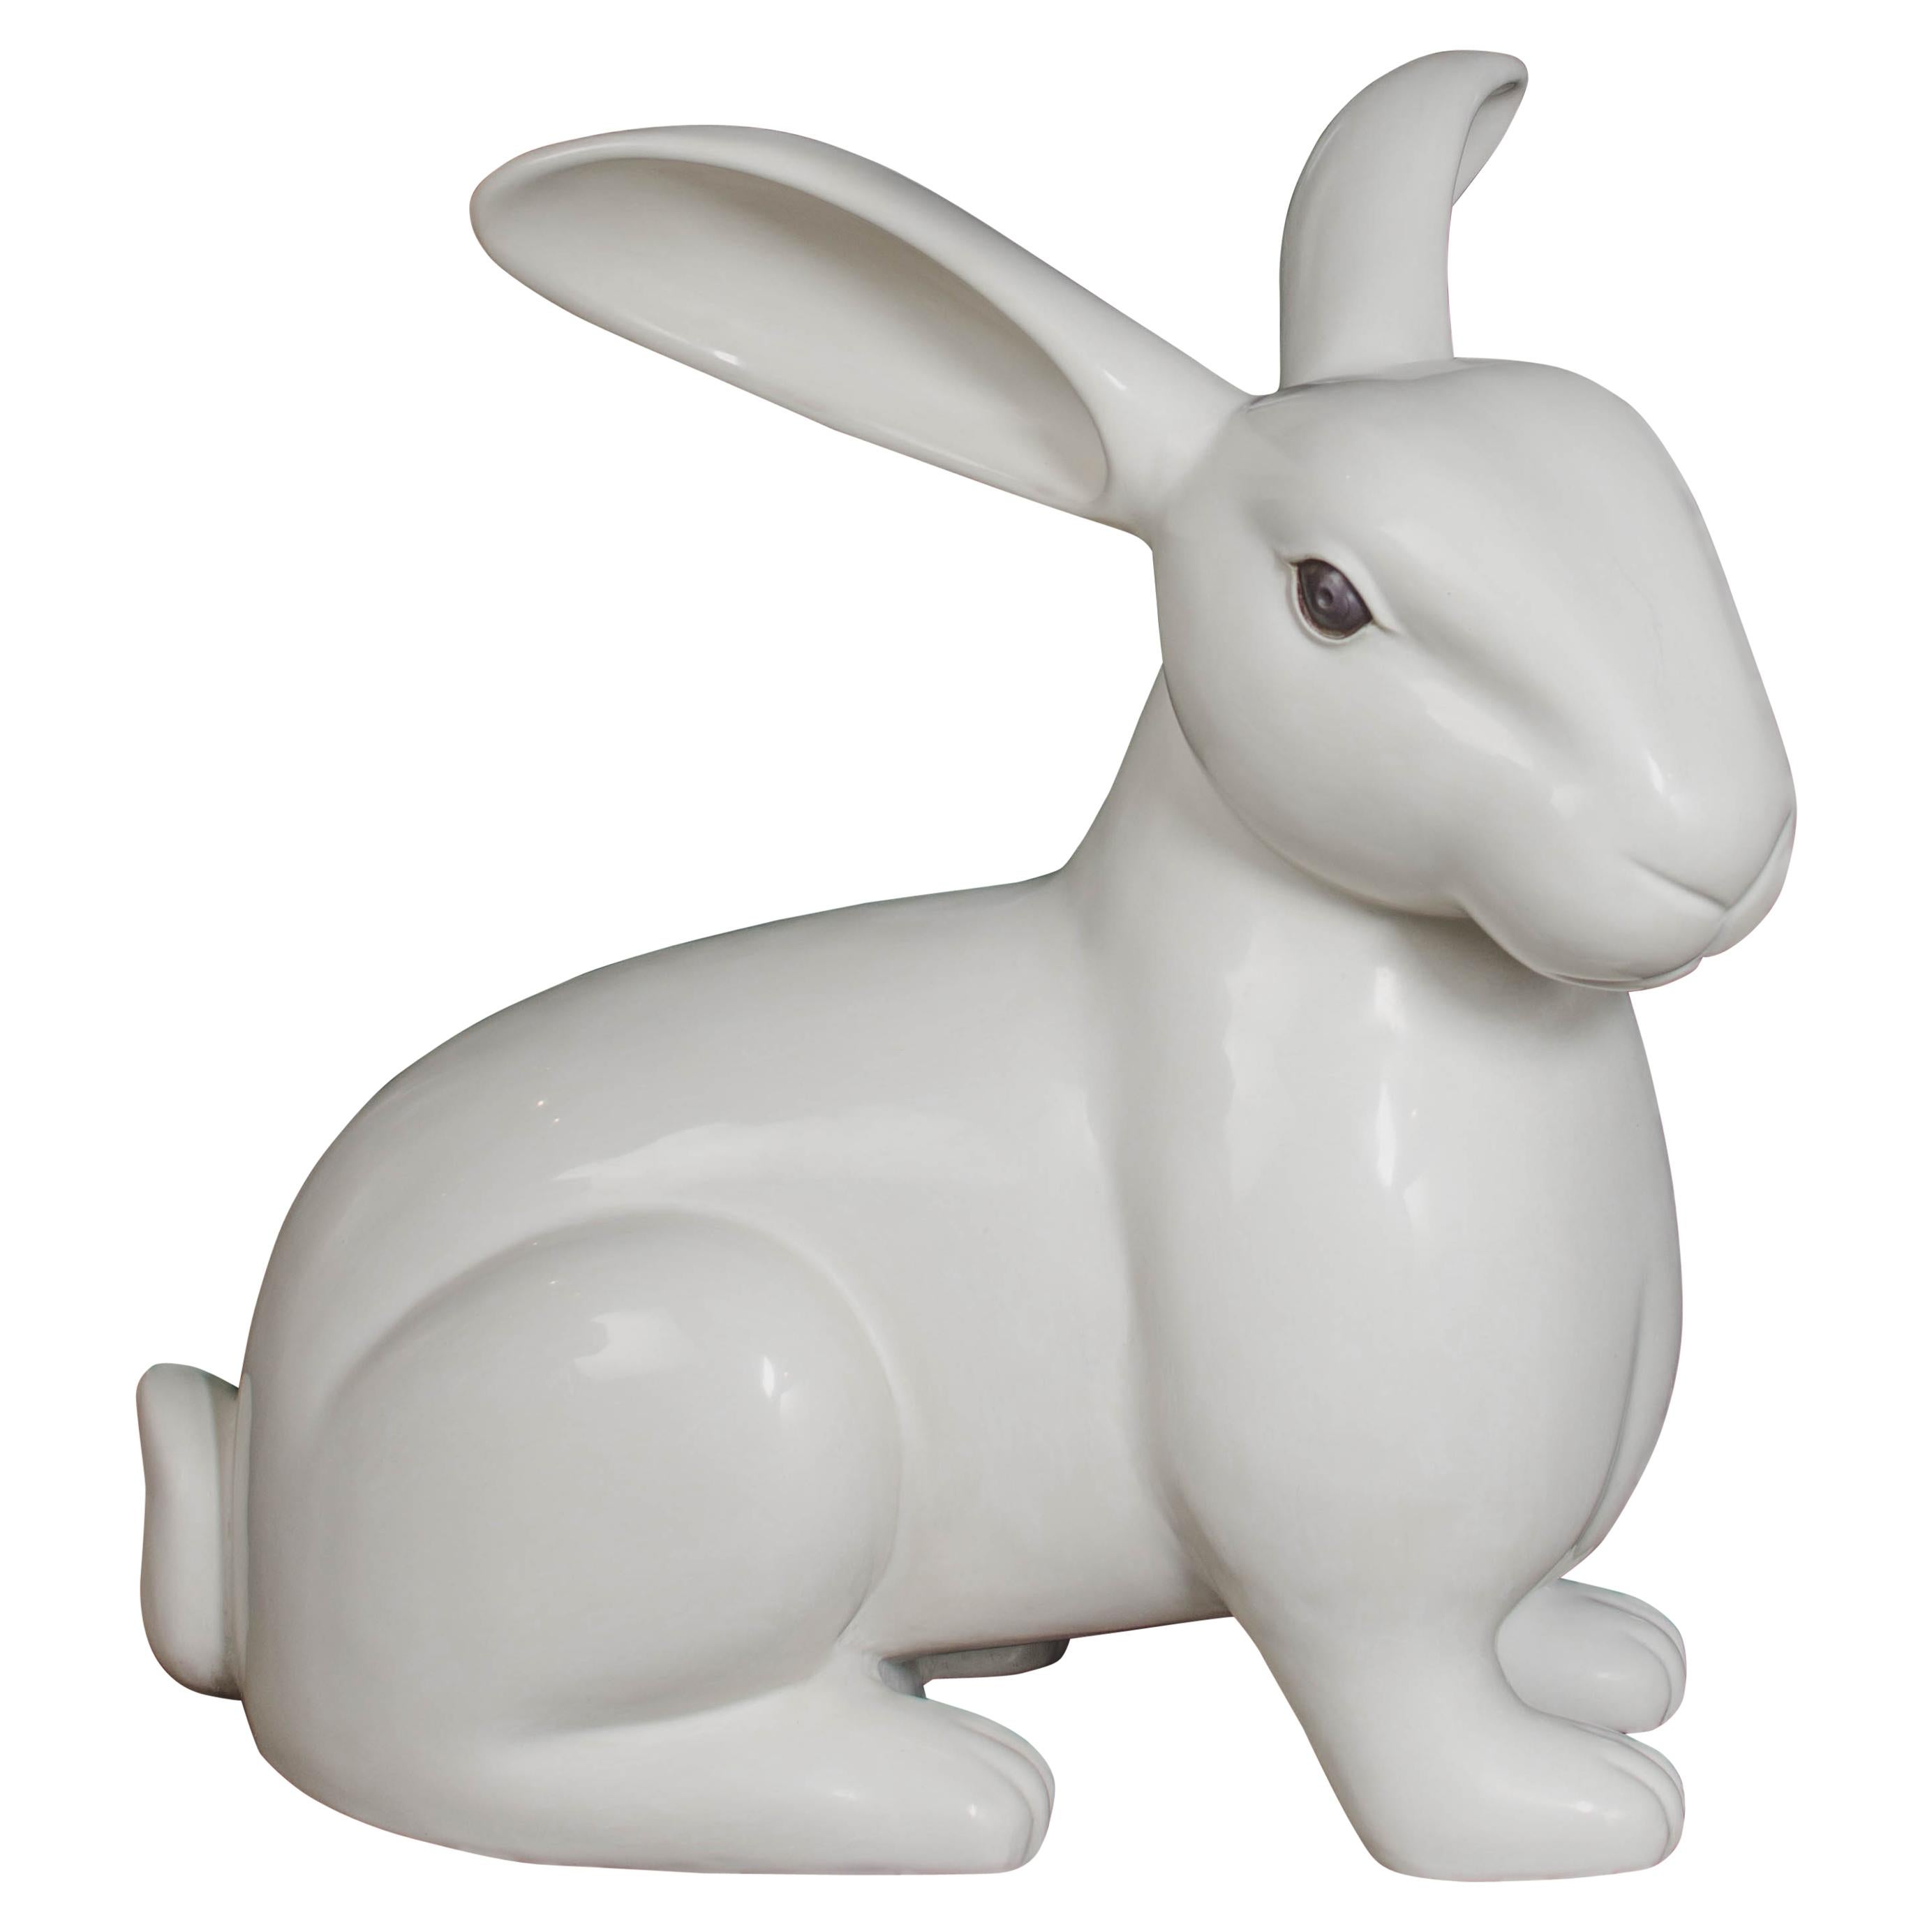 Rabbit Sculpture, Cream Lacquer by Robert Kuo, Hand Repousse, Limited Edition